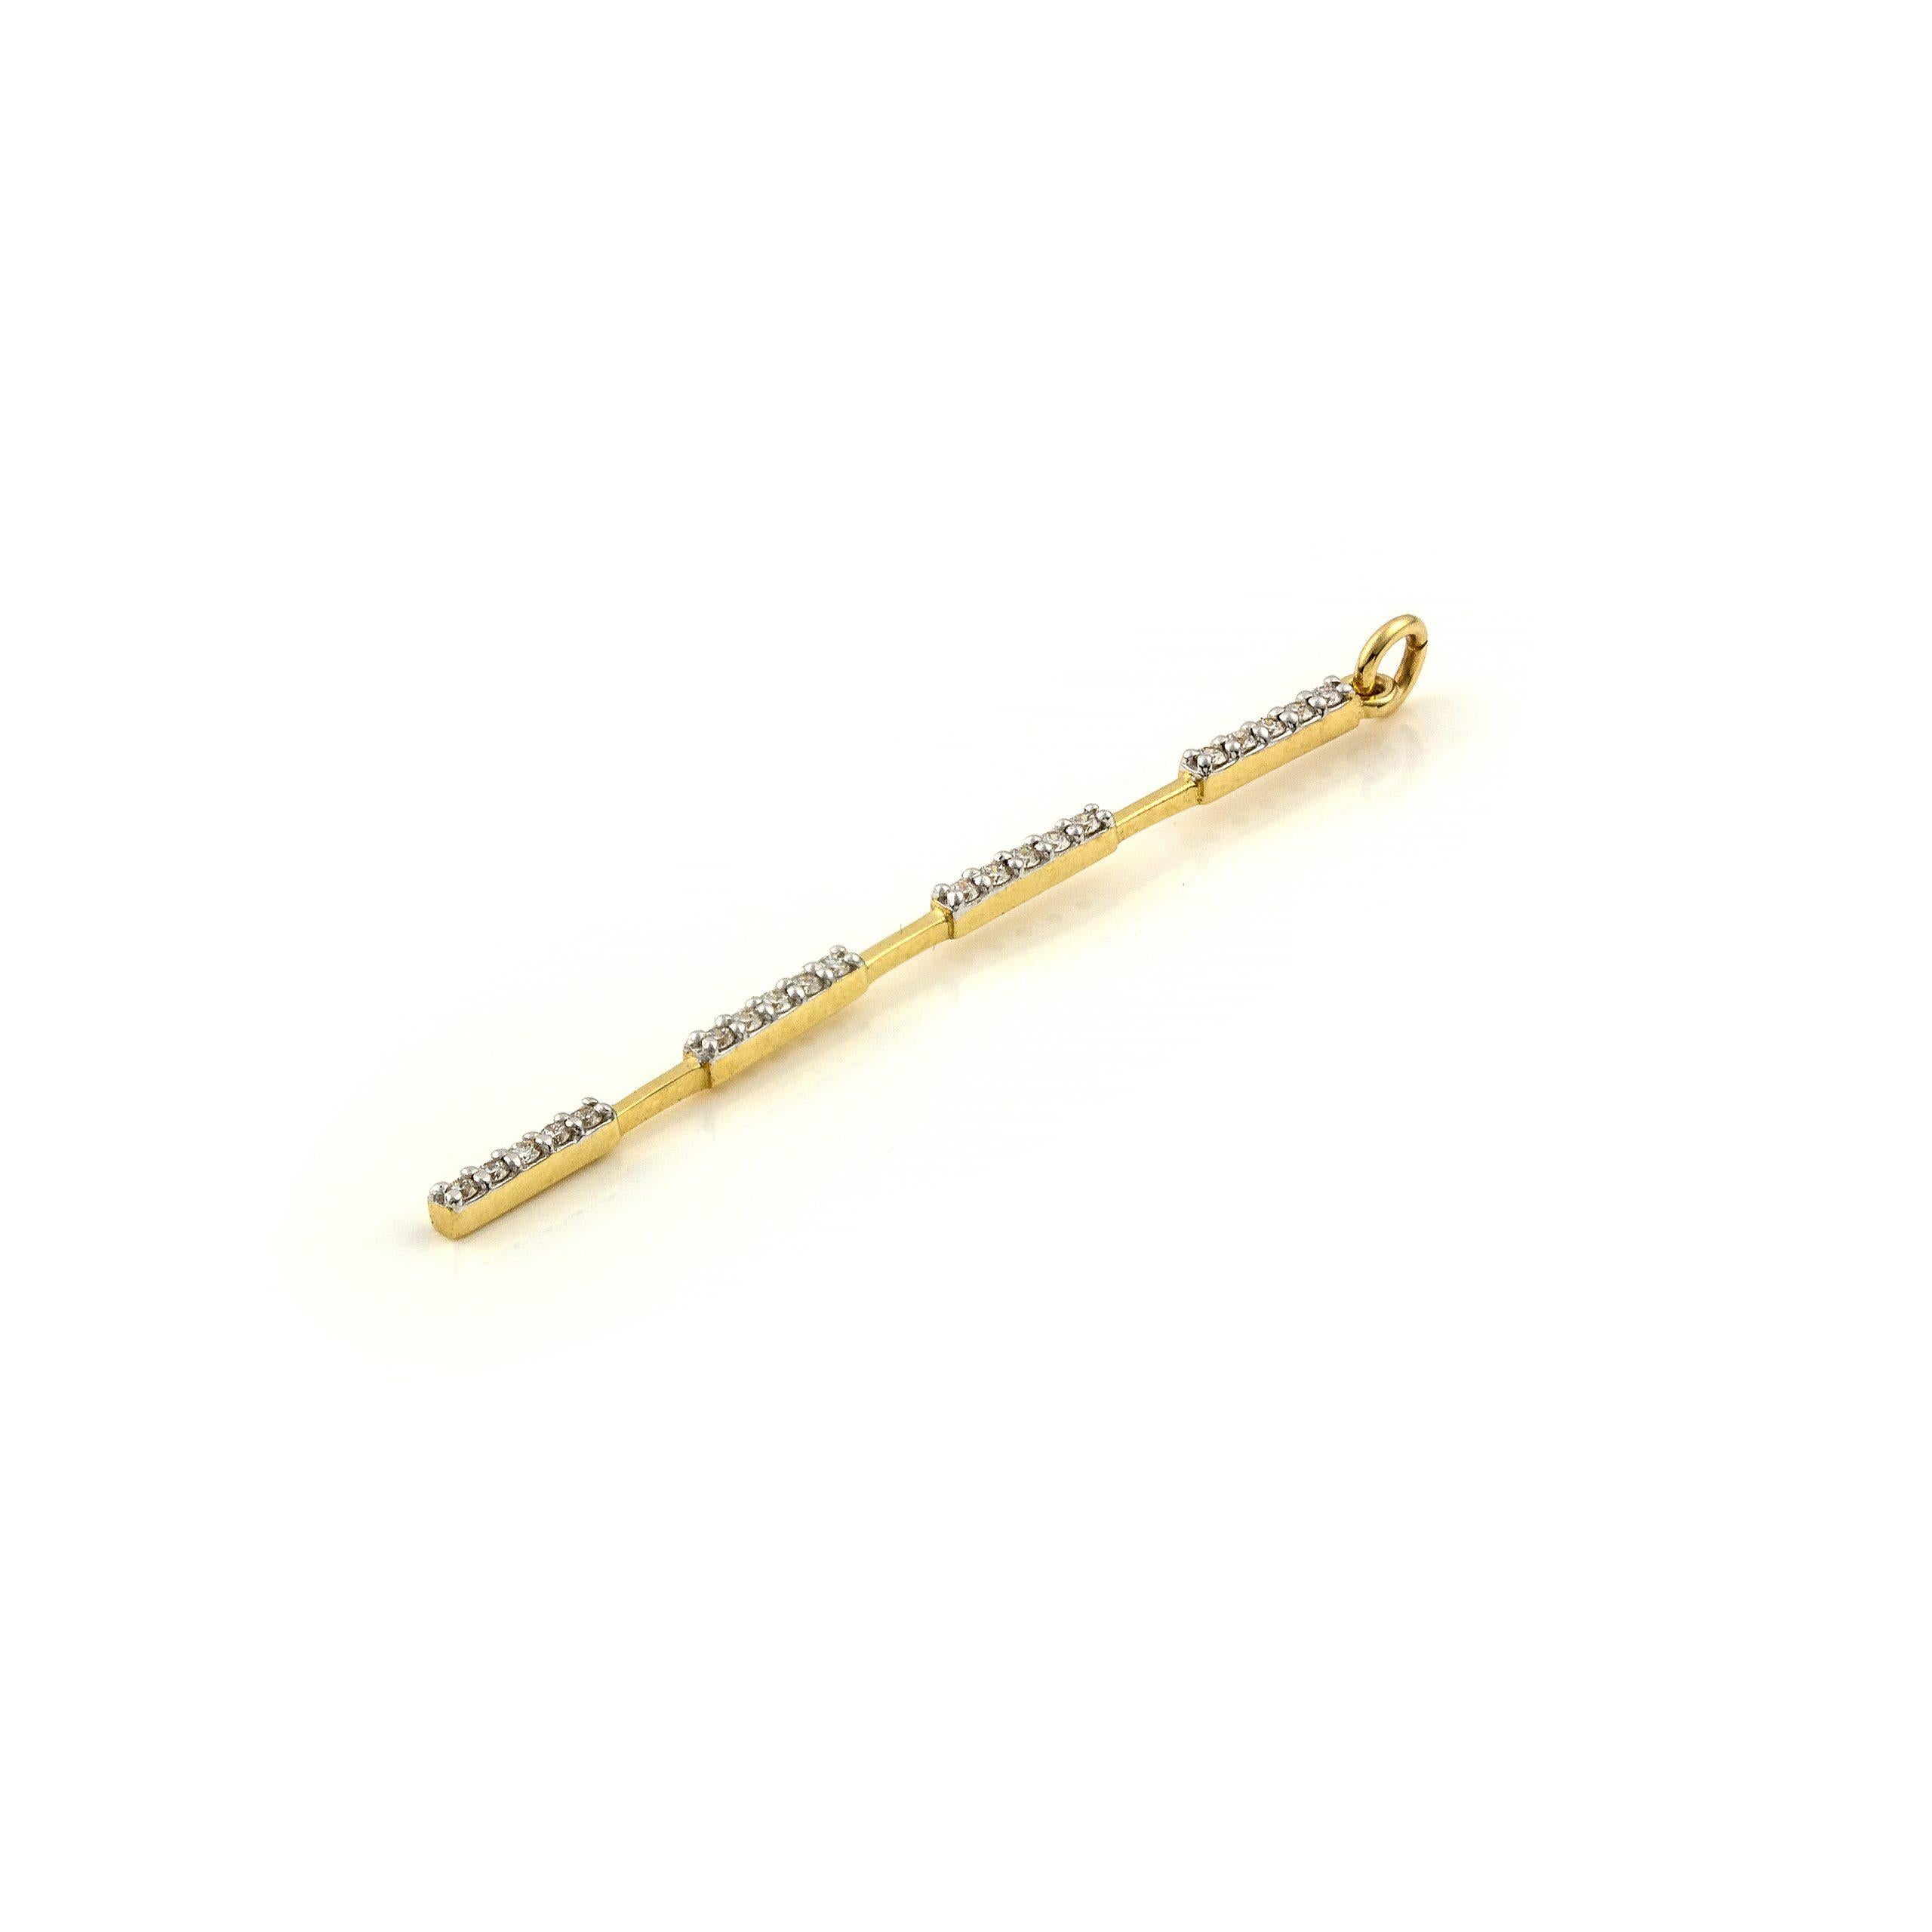 Recycled 14K Yellow Gold

Diamonds Approx. 0.2 ct

Bar Length: 5 cm/ 1.96 inches

The pendant is sold WITHOUT a chain.

Long Bar Pendant in Yellow Gold and Diamonds

This collection combines the simplicity of the single piece with the opulence of